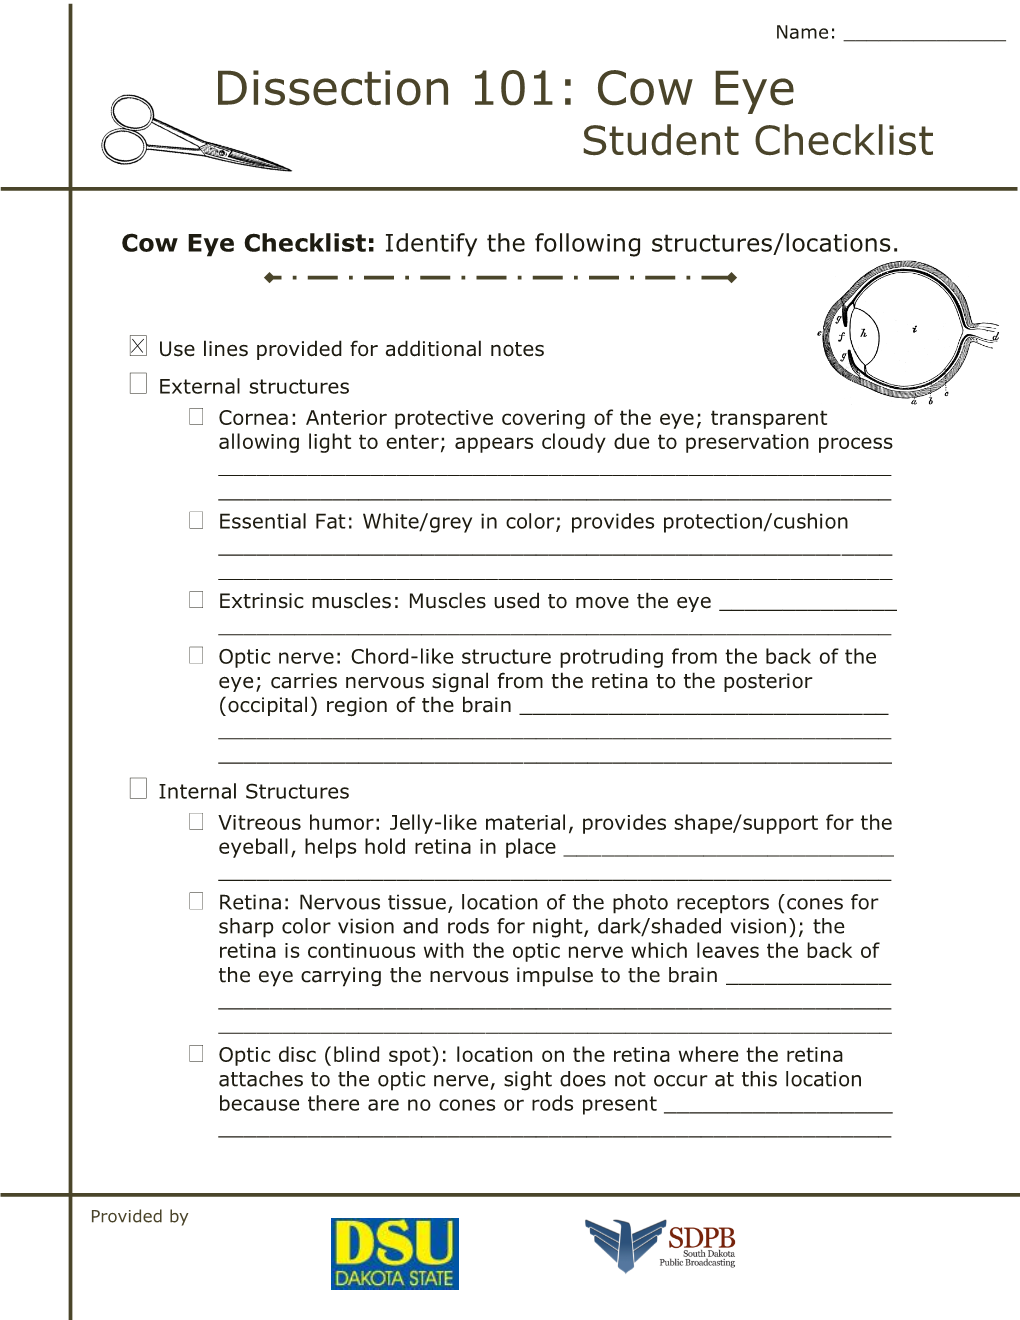 Dissection 101: Cow Eye Student Checklist